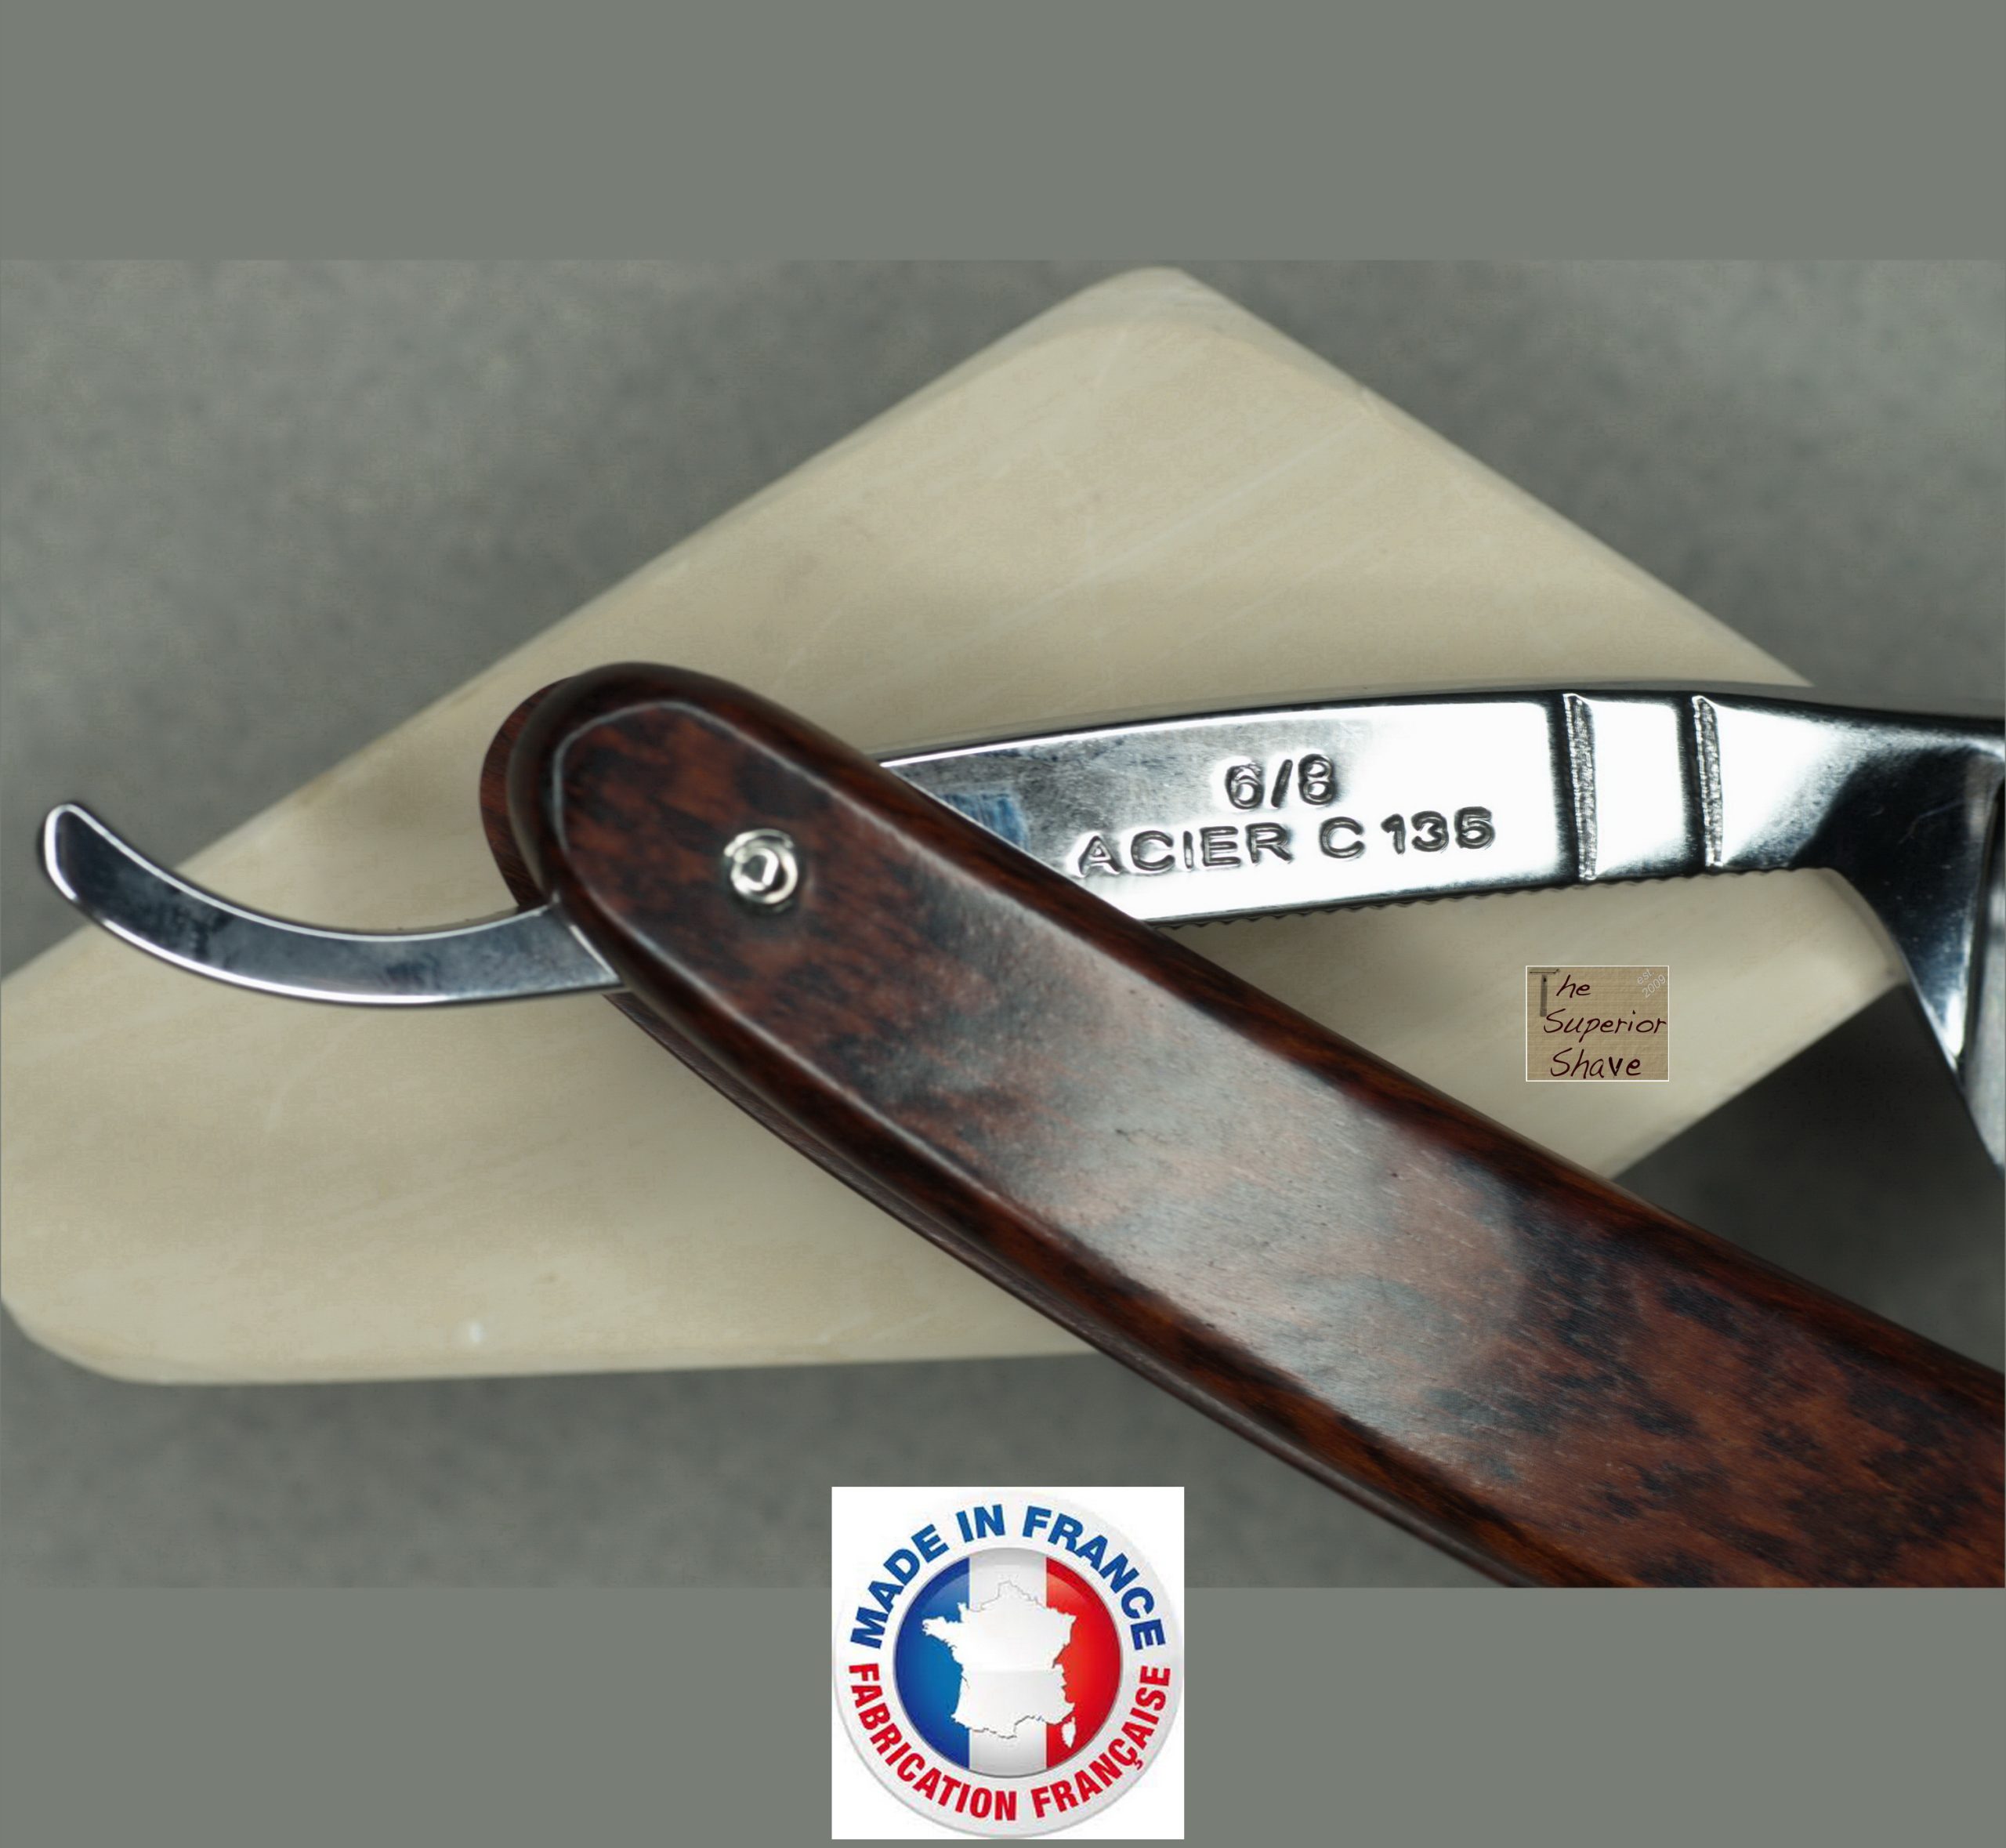 Thiers Issard 275 Le Grelot French Straight Razor | Carbon Steel | 6/8 Size  | Full Hollow Ground | Round Point | Snakewood Handle | Made in France –  The Superior Shave